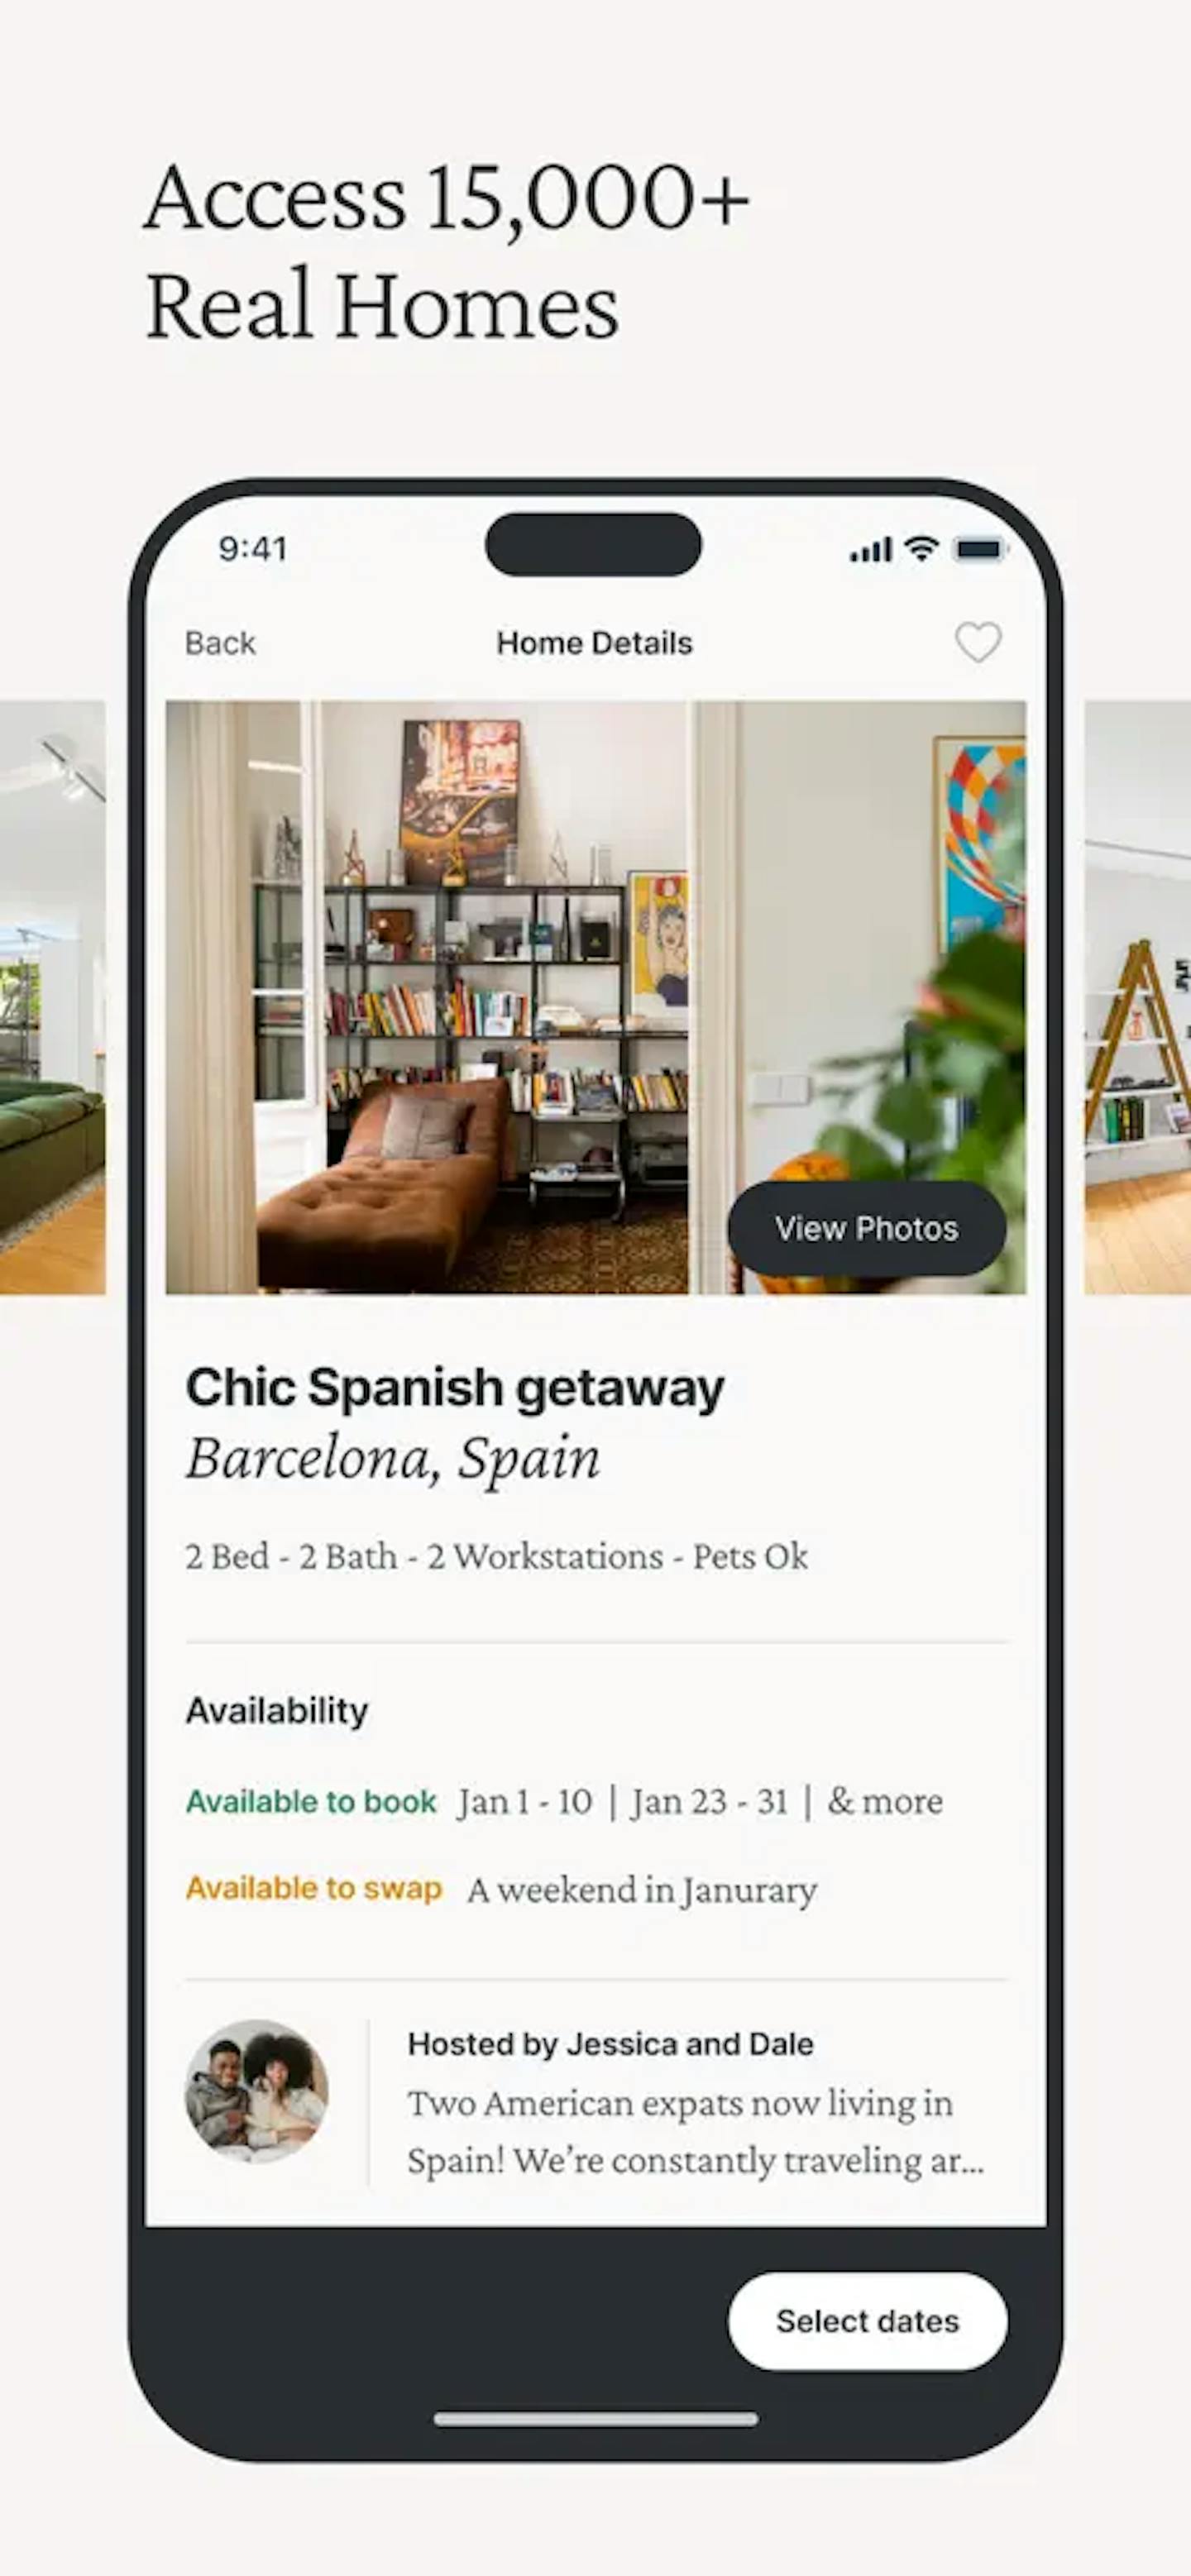 Access 20,000+ real homes globally with Kindred - Detailed view of a chic Barcelona apartment listing, highlighting the vast selection of authentic and cozy accommodations available for swapping.